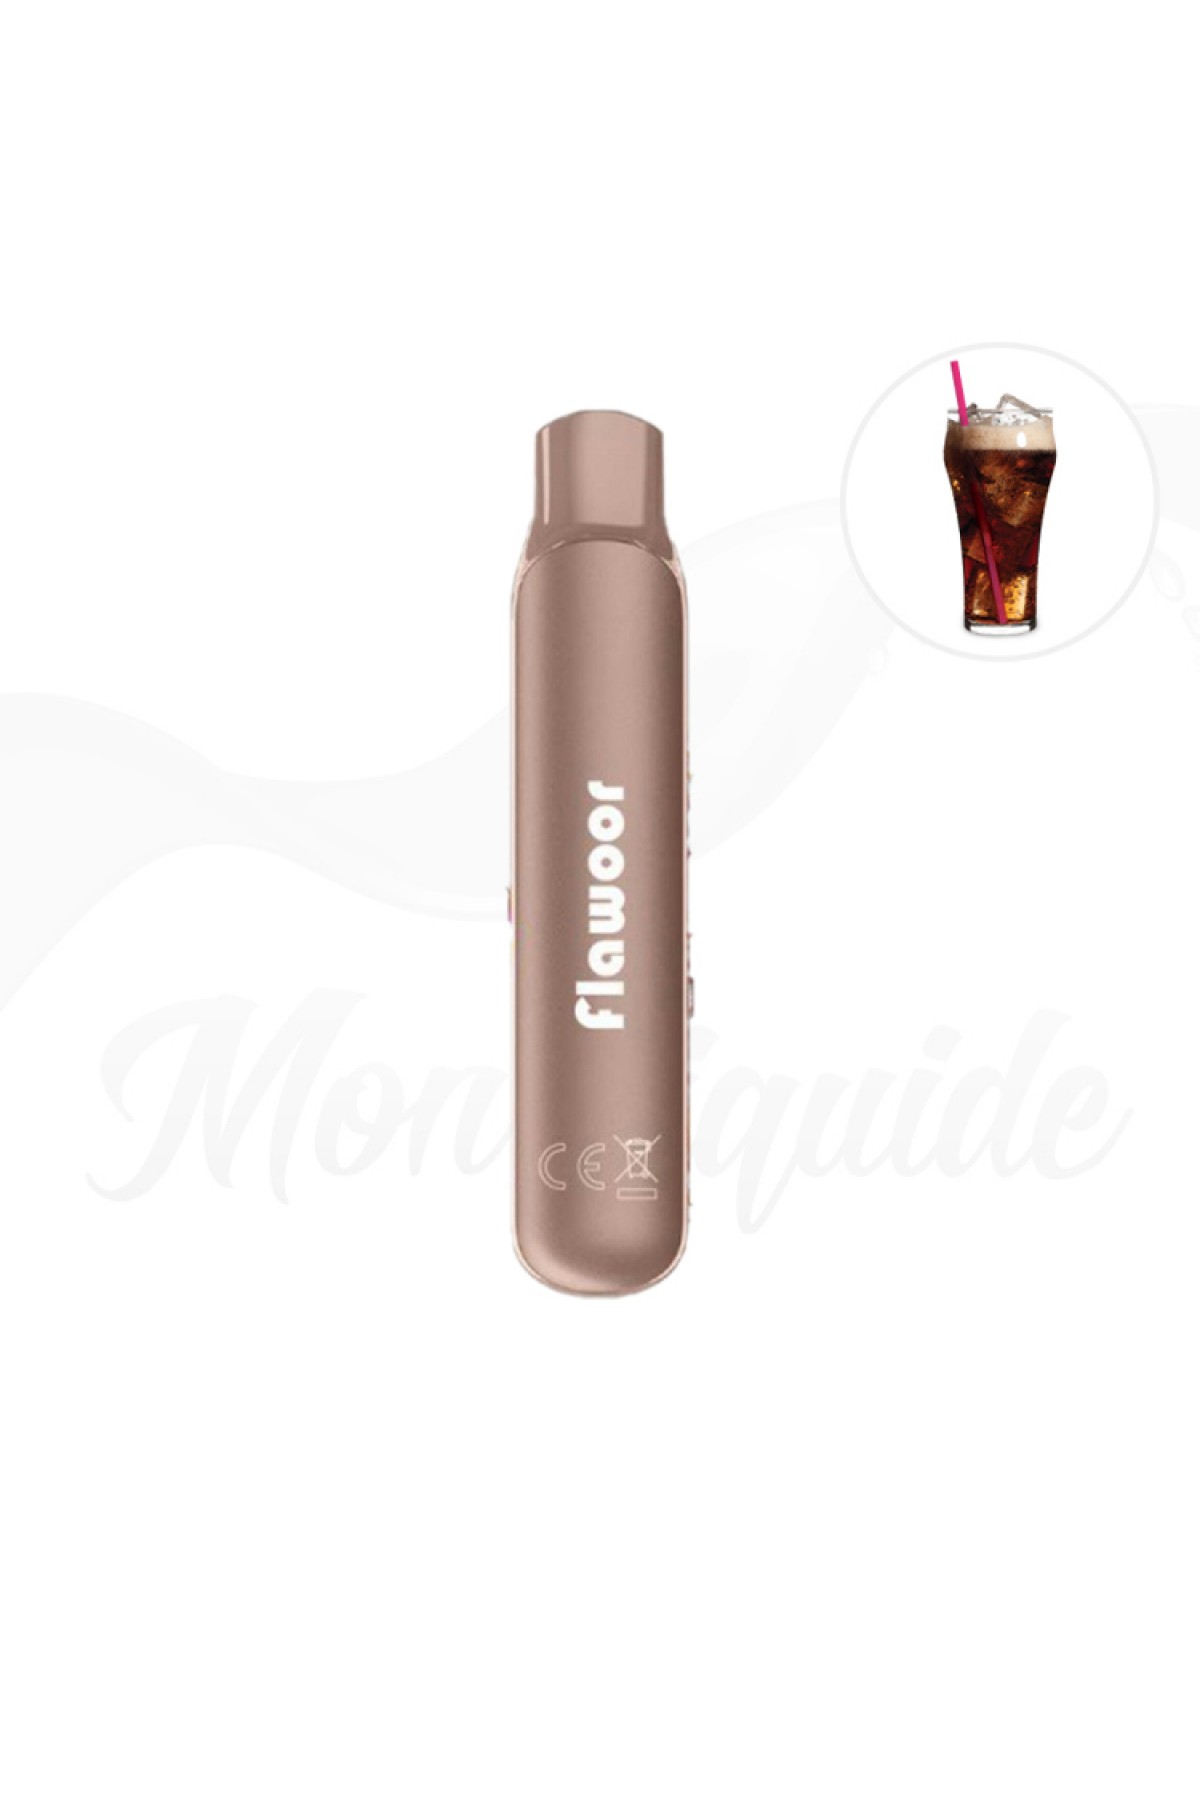 Flawoor Mate - Cola Freeze 600 Puff Kit